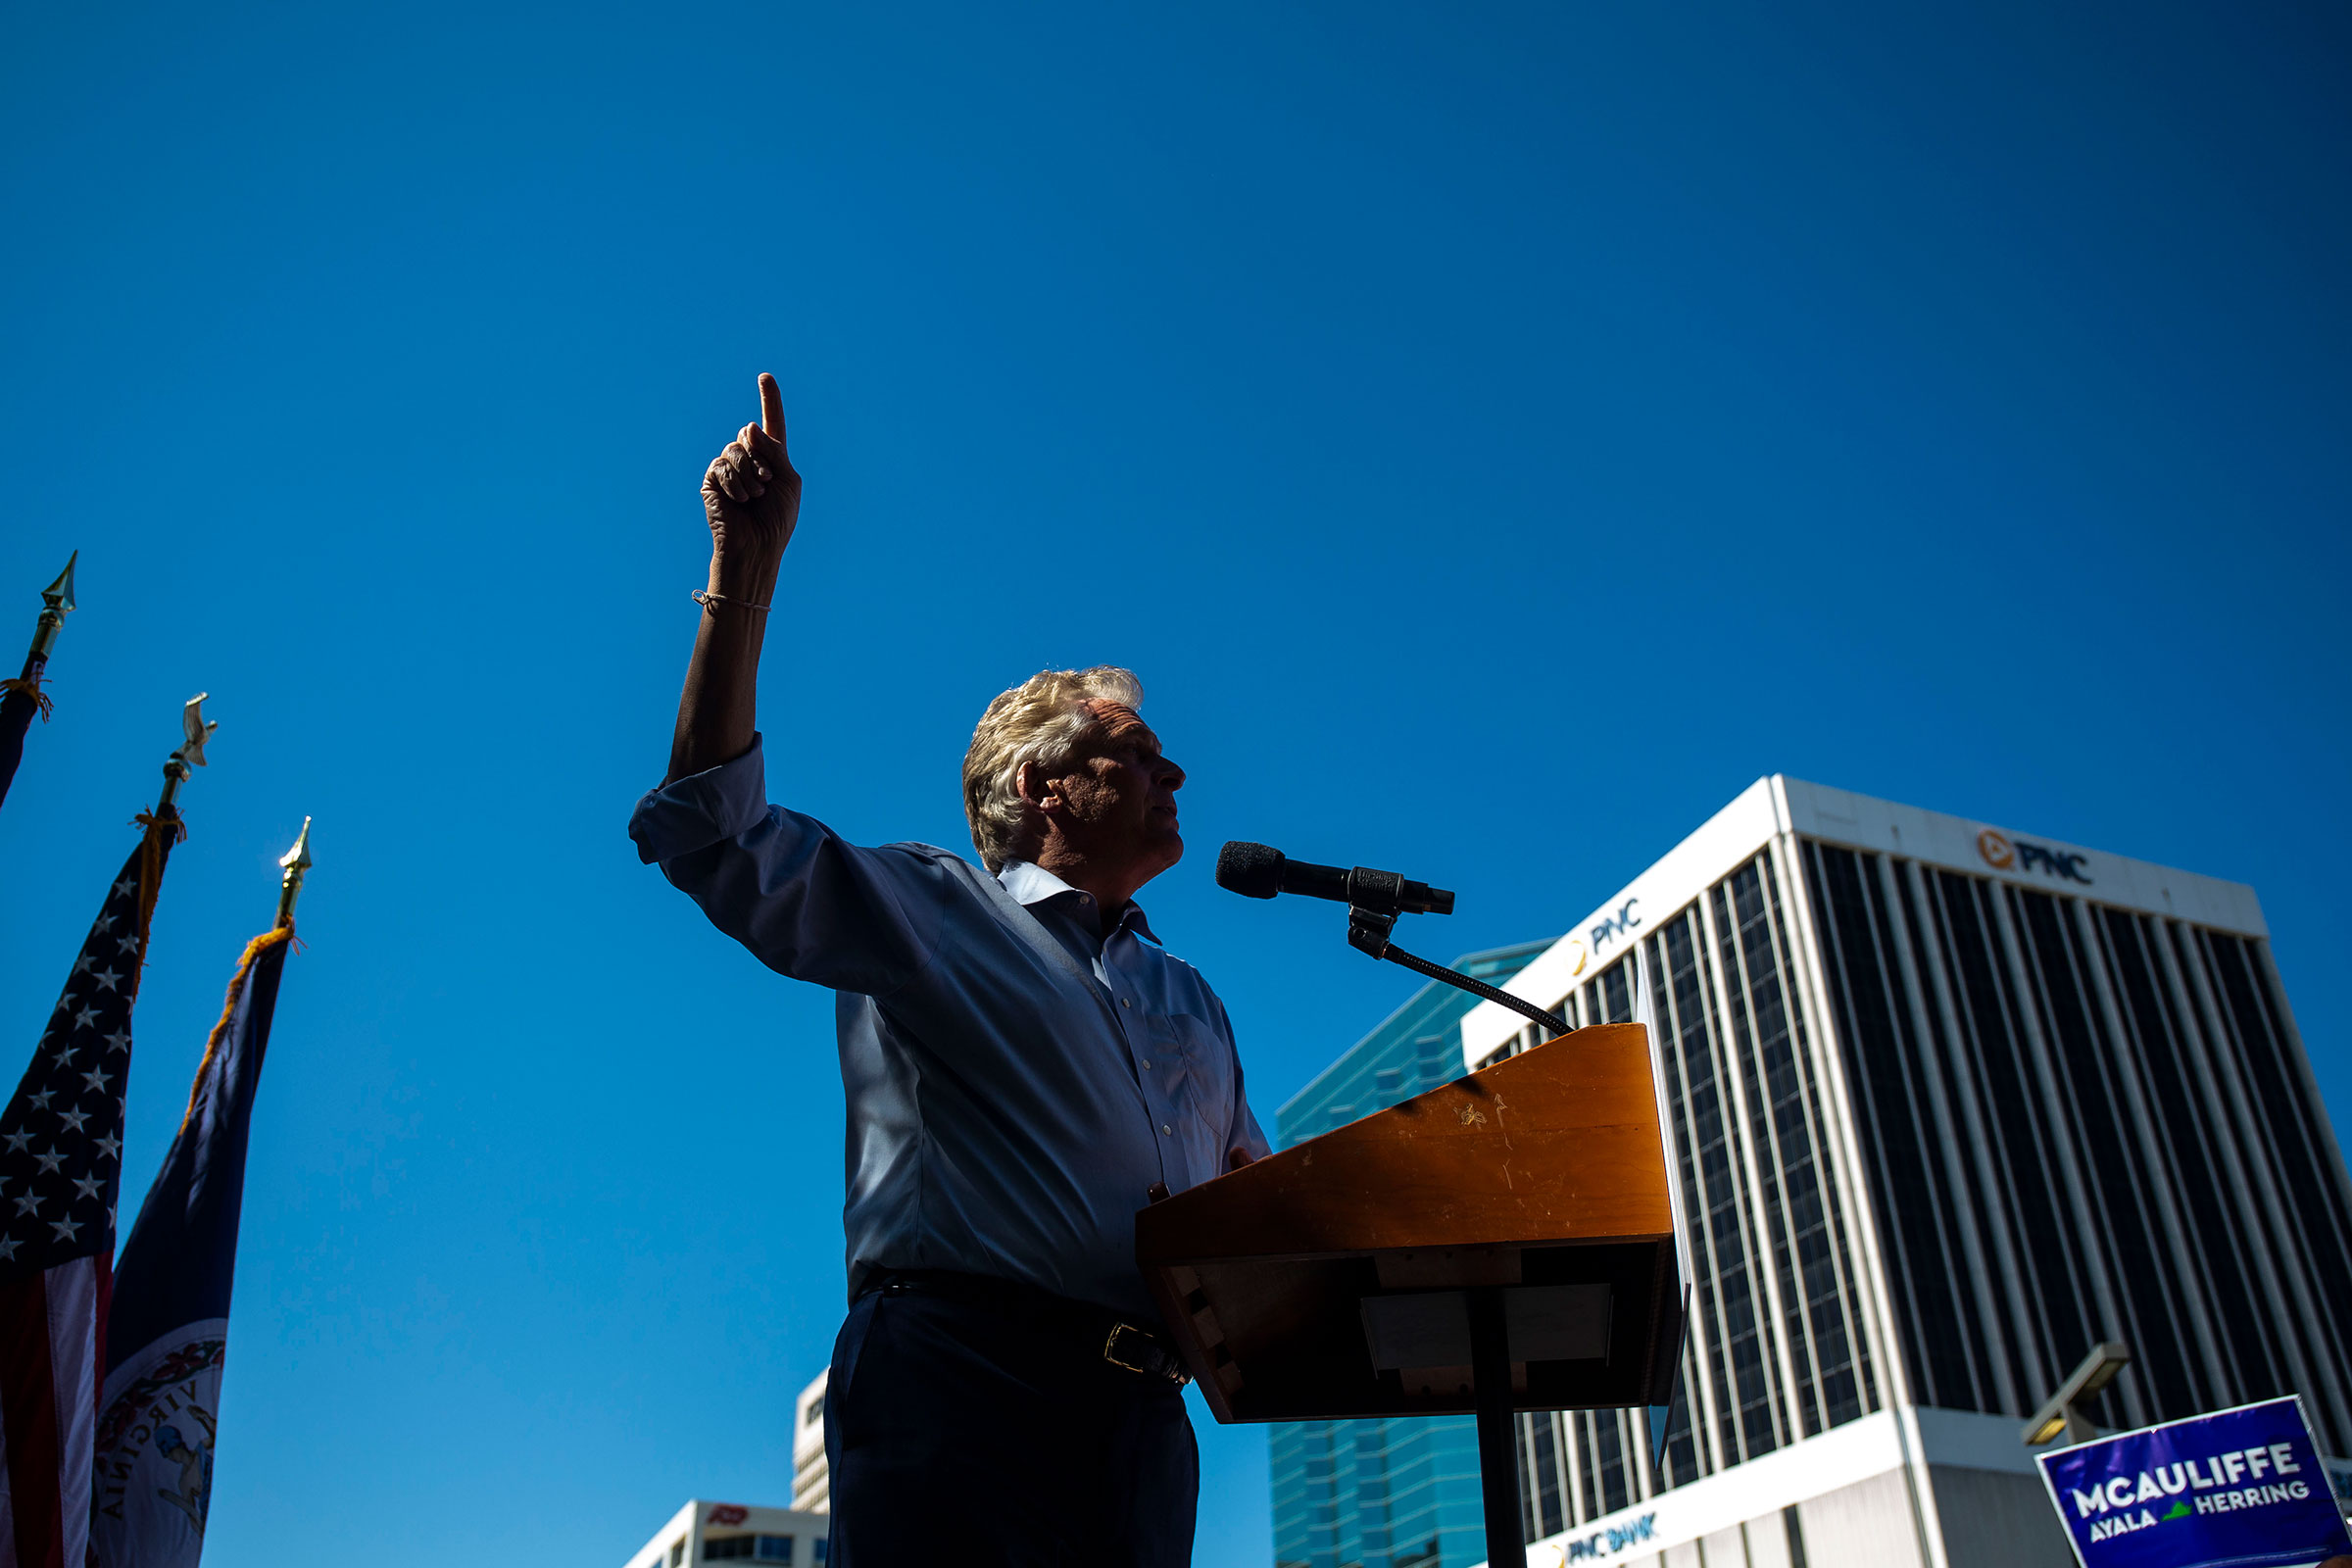 Former Virginia Governor Terry McAuliffe speaks during a Souls to the Polls rally on Oct. 17, 2021 in Norfolk, Va. (Zach Gibson—Getty Images)